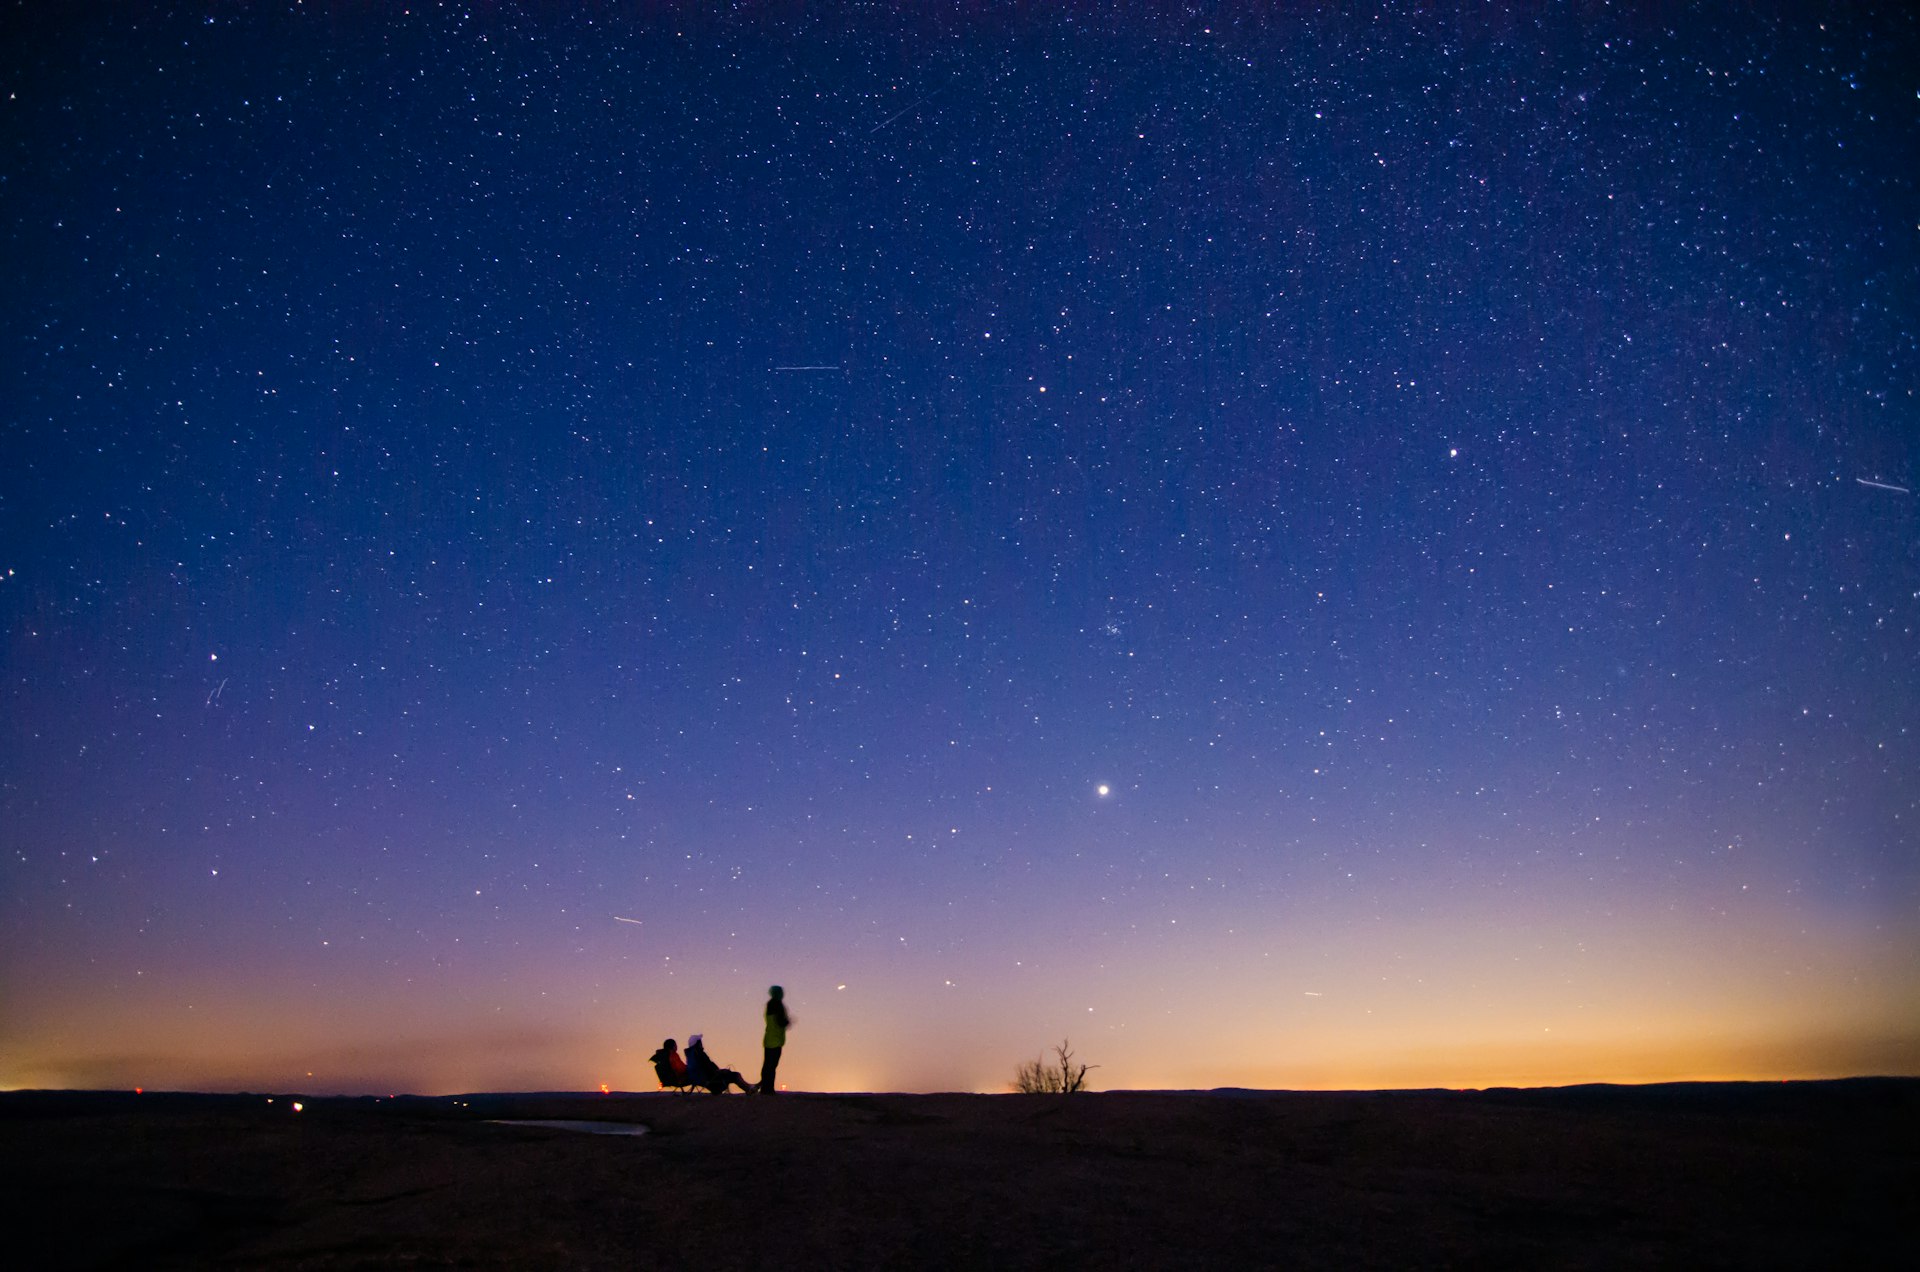 People in silhouette gaze at a sky filled with stars